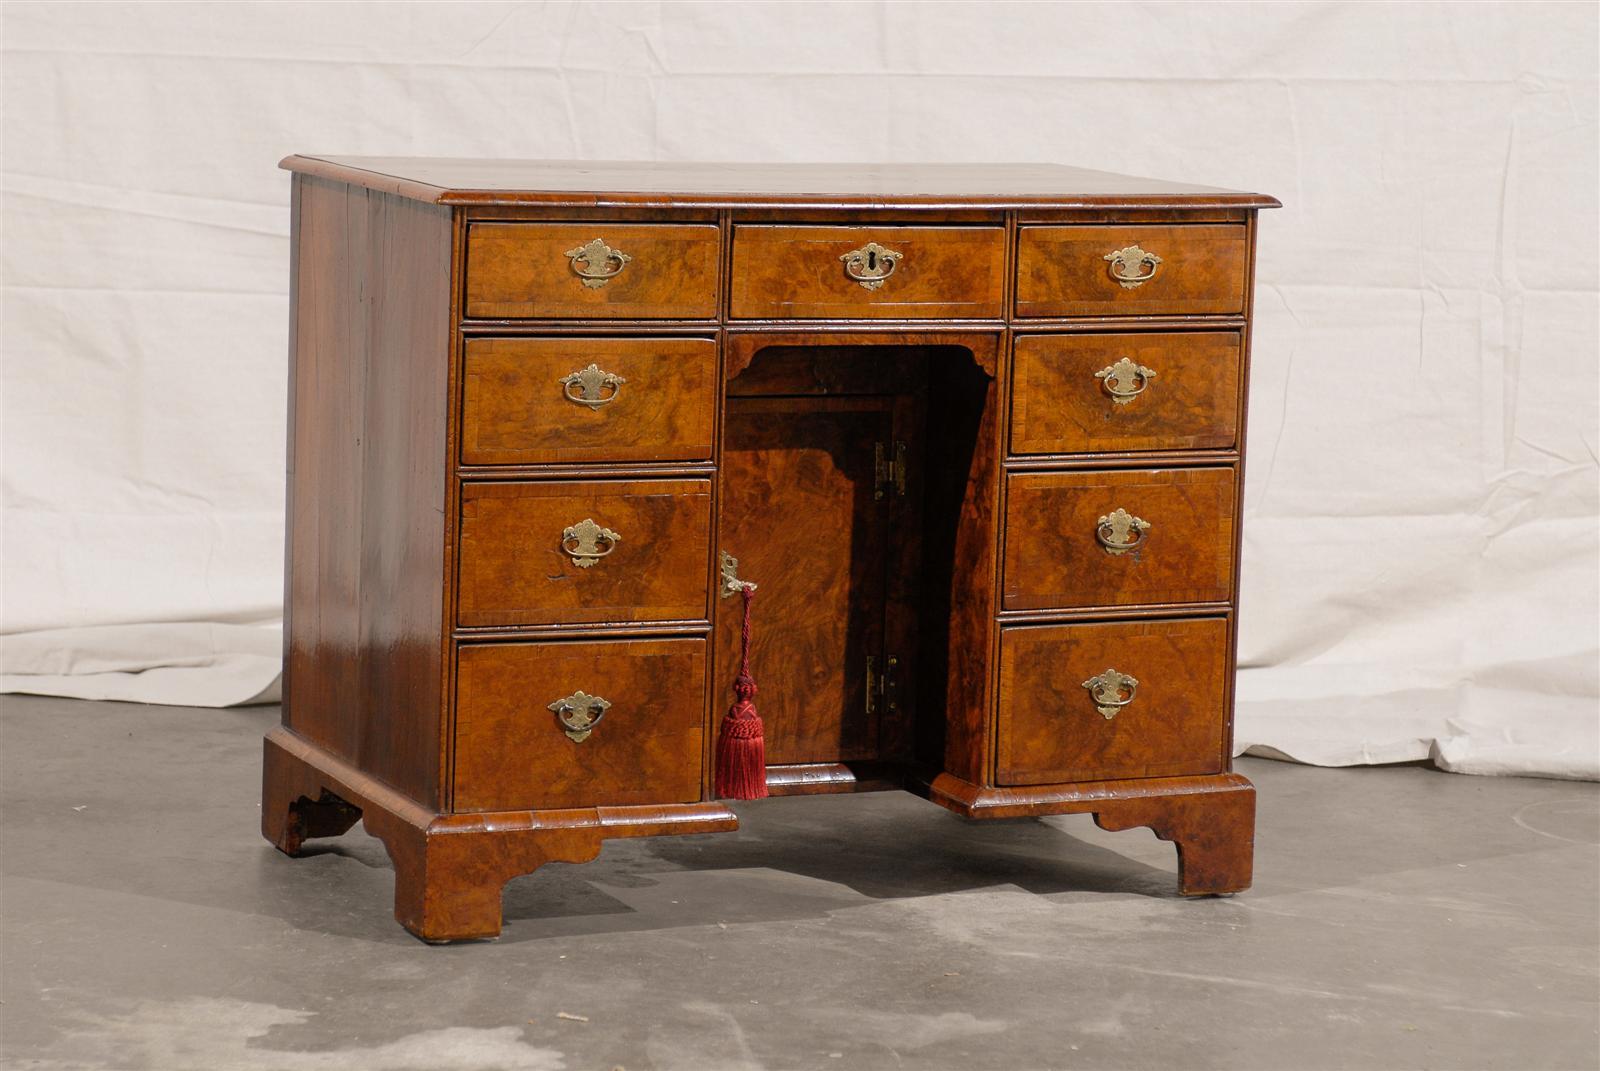 19th Century English Knee Hole Desk with Burled Walnut Top In Good Condition For Sale In Atlanta, GA